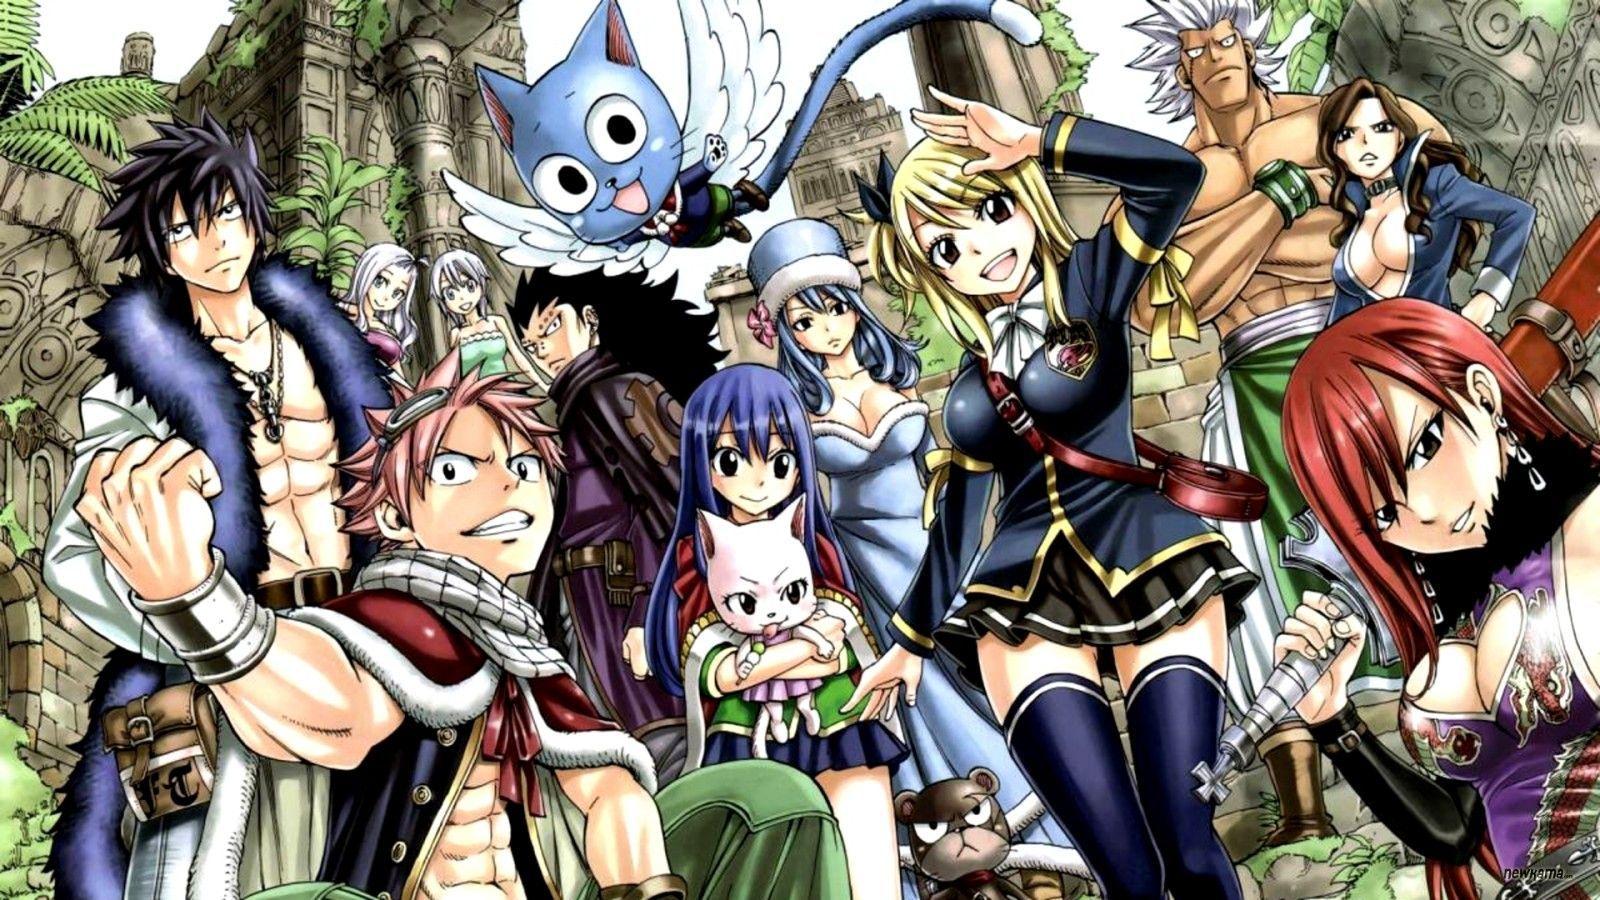 Fairy Tail Guild Wallpapers Top Free Fairy Tail Guild Backgrounds Wallpaperaccess